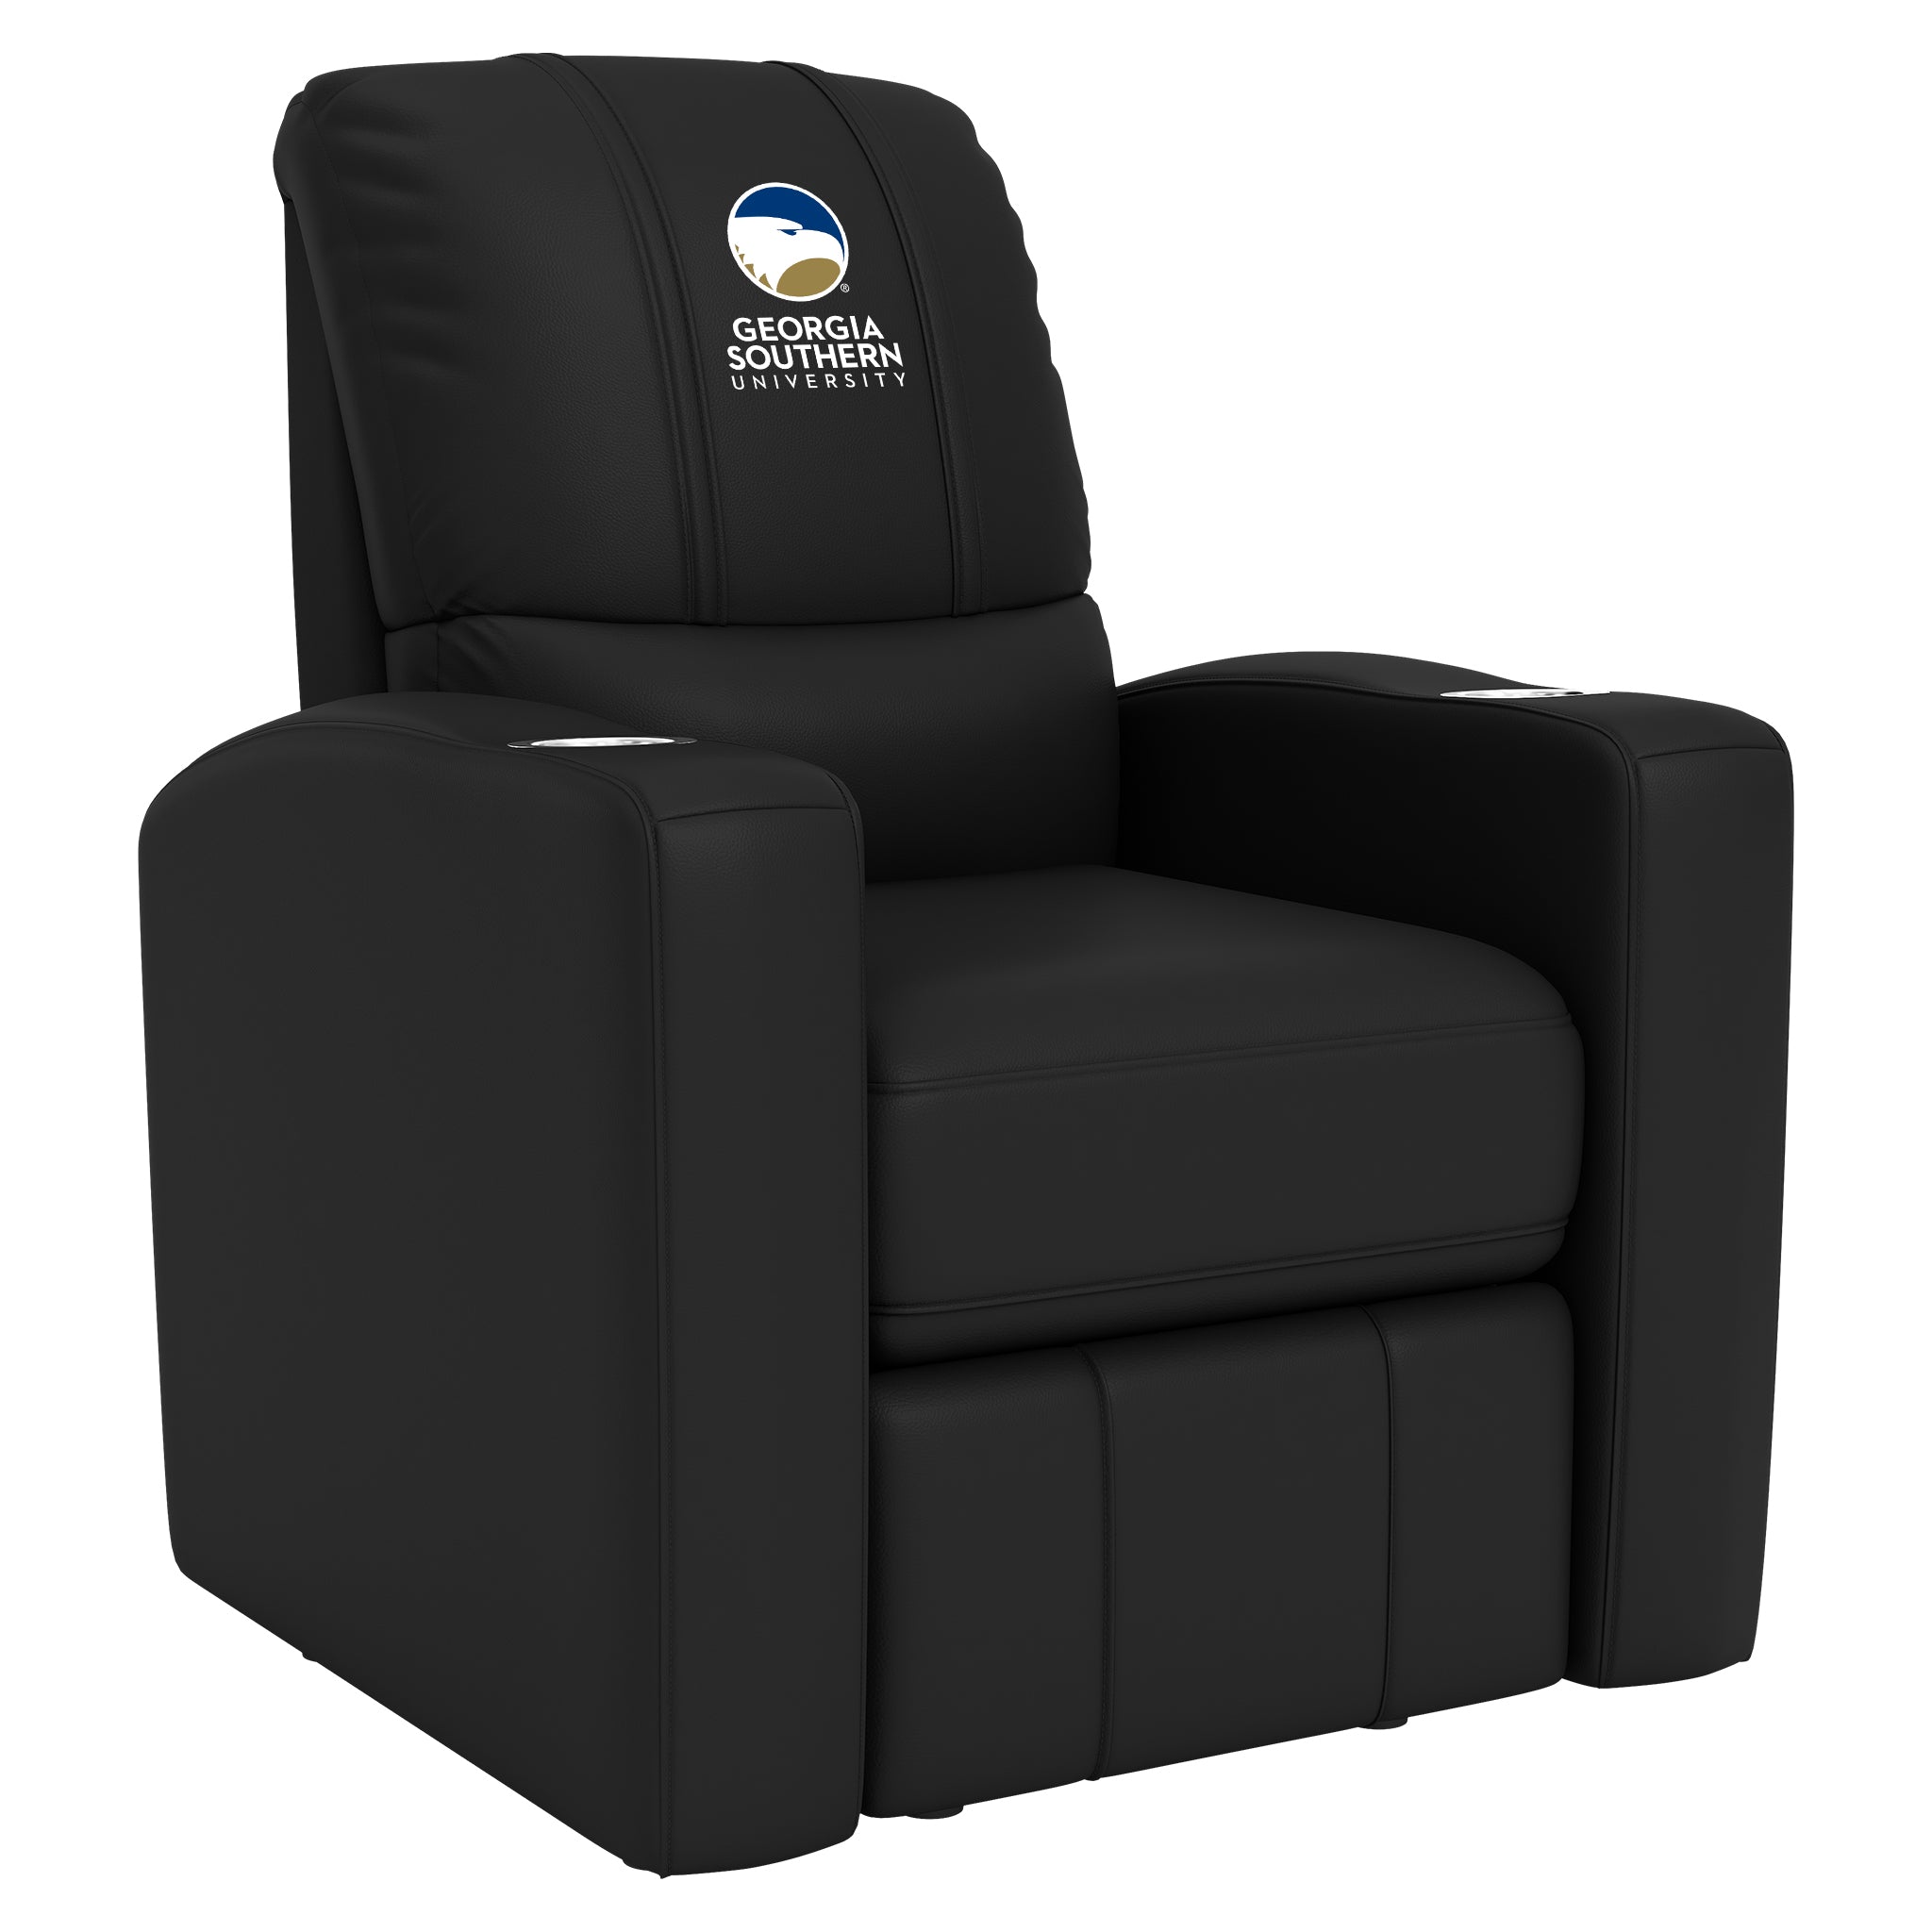 Georgia Southern University Stealth Recliner with Georgia Southern University Logo